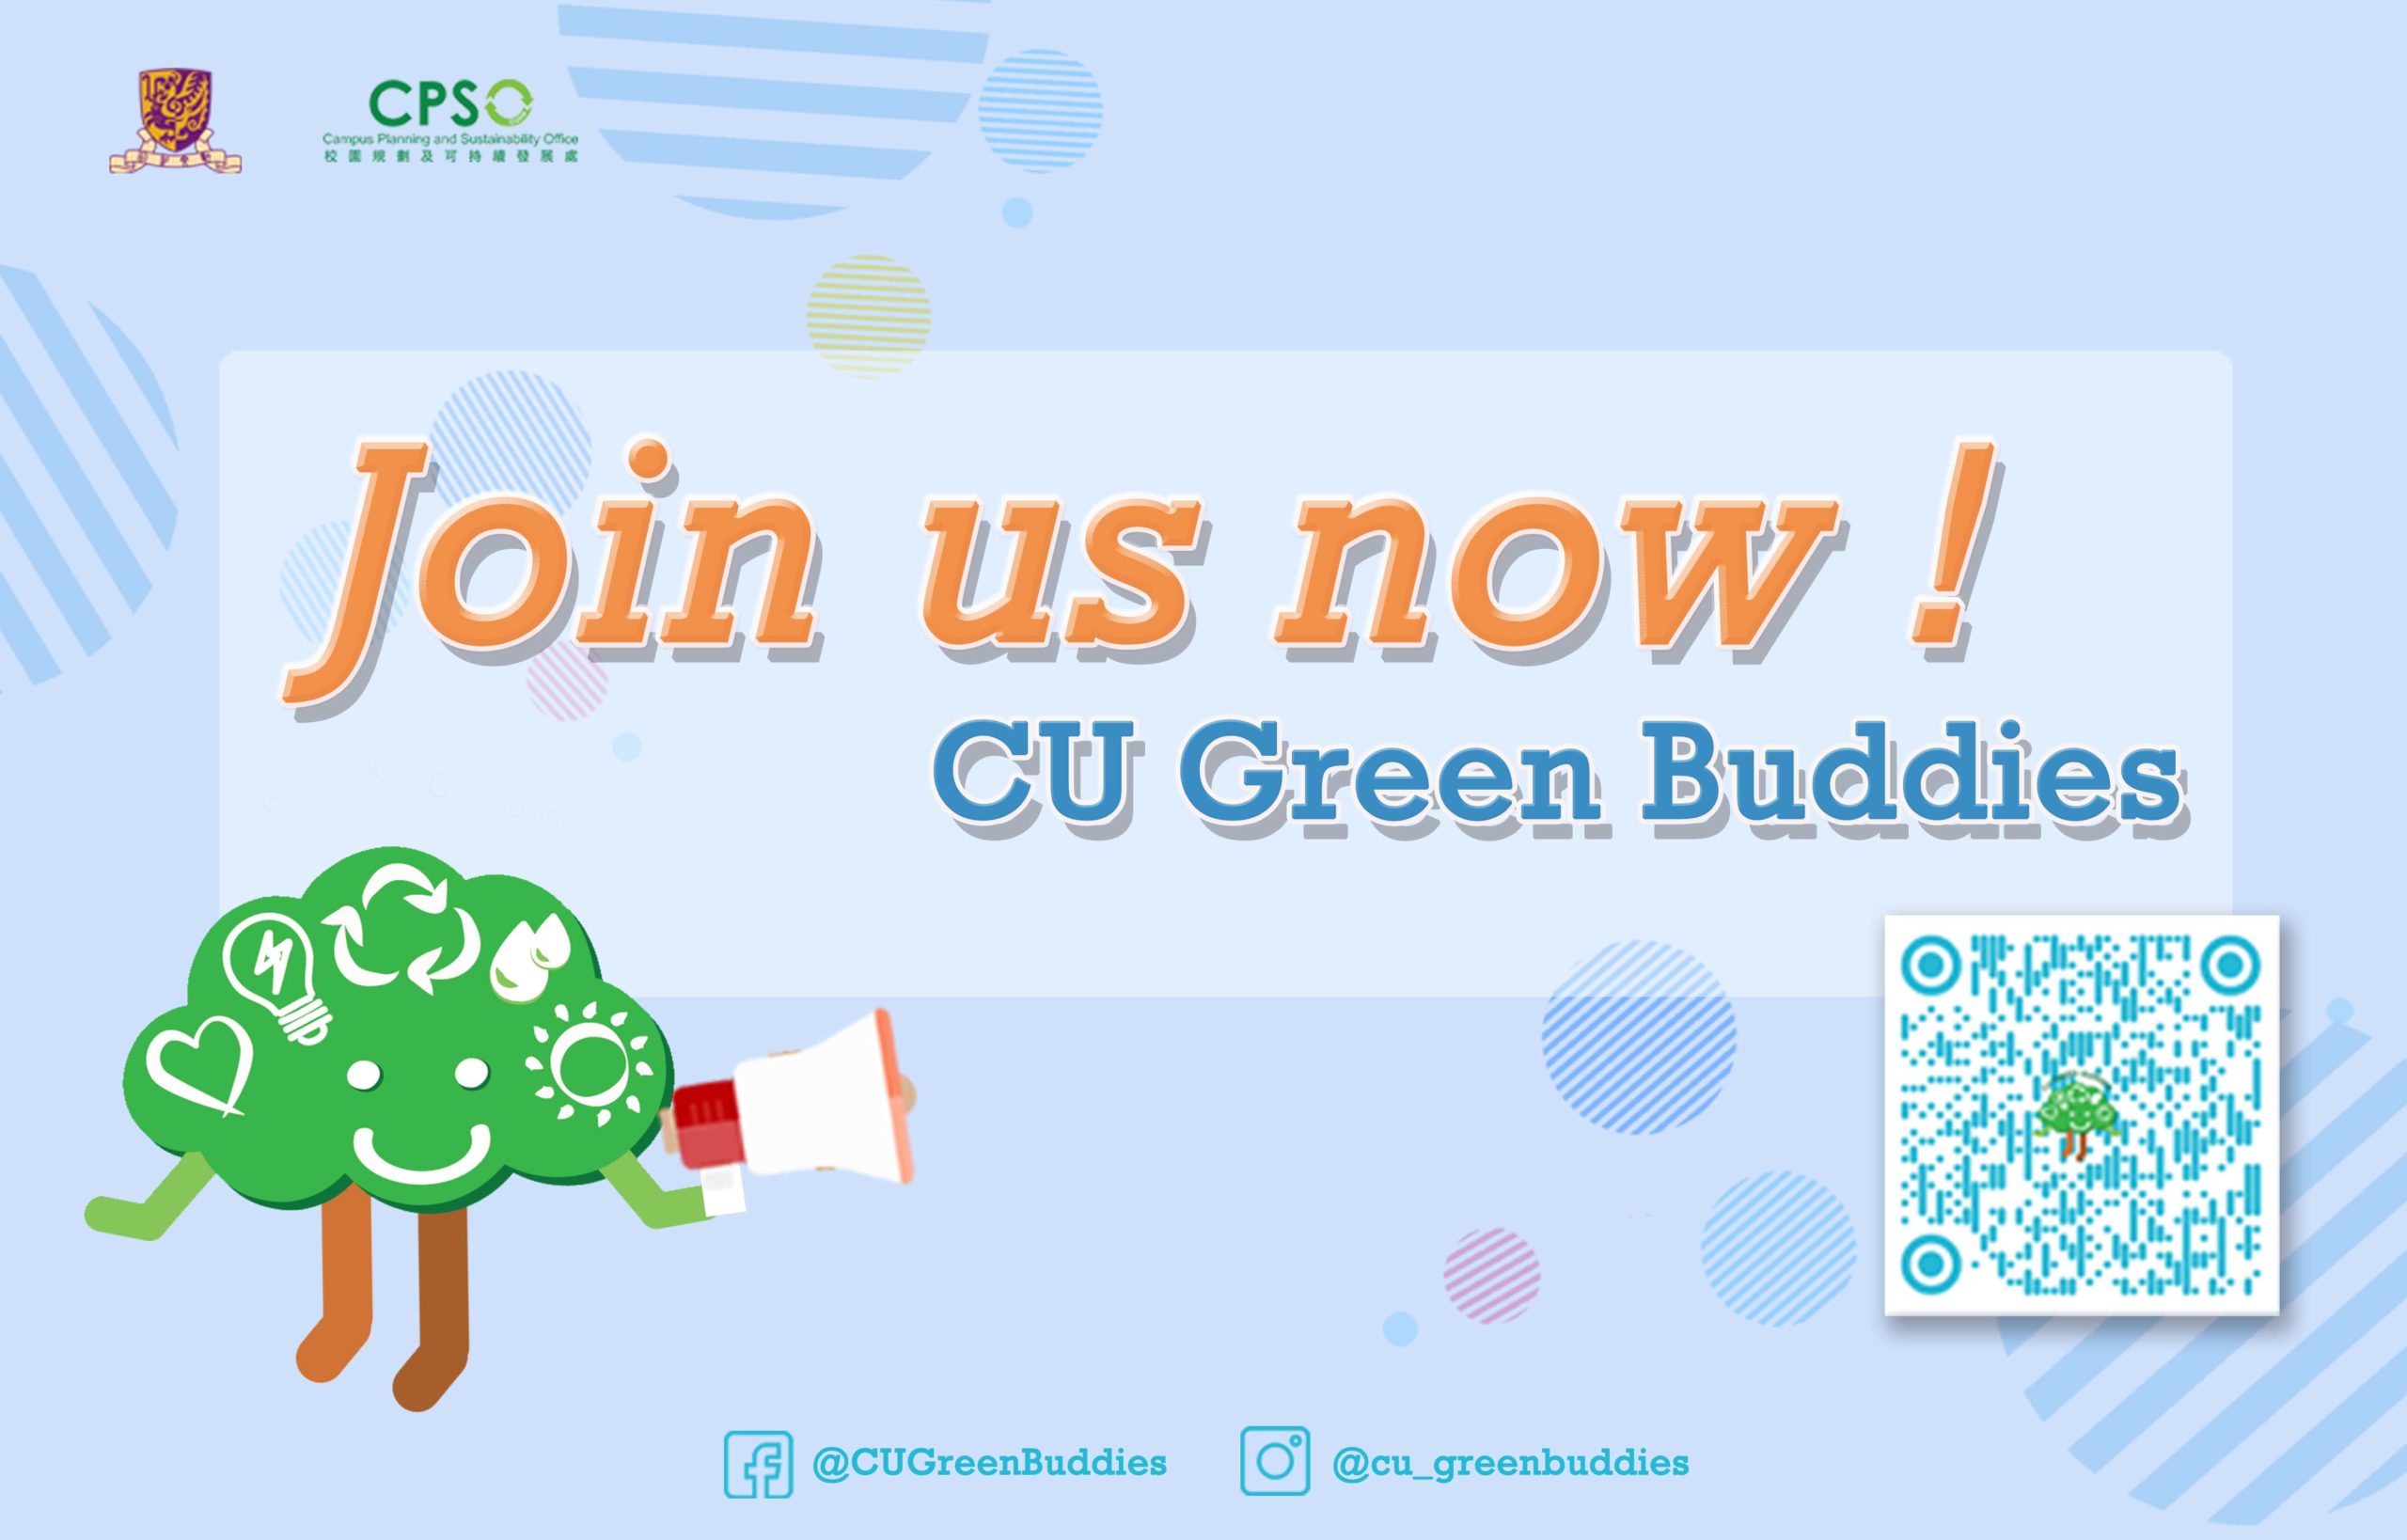 Welcome to be a ‘CU Green Buddy’ –Join now to receive a gift, all students and staff members are welcome!